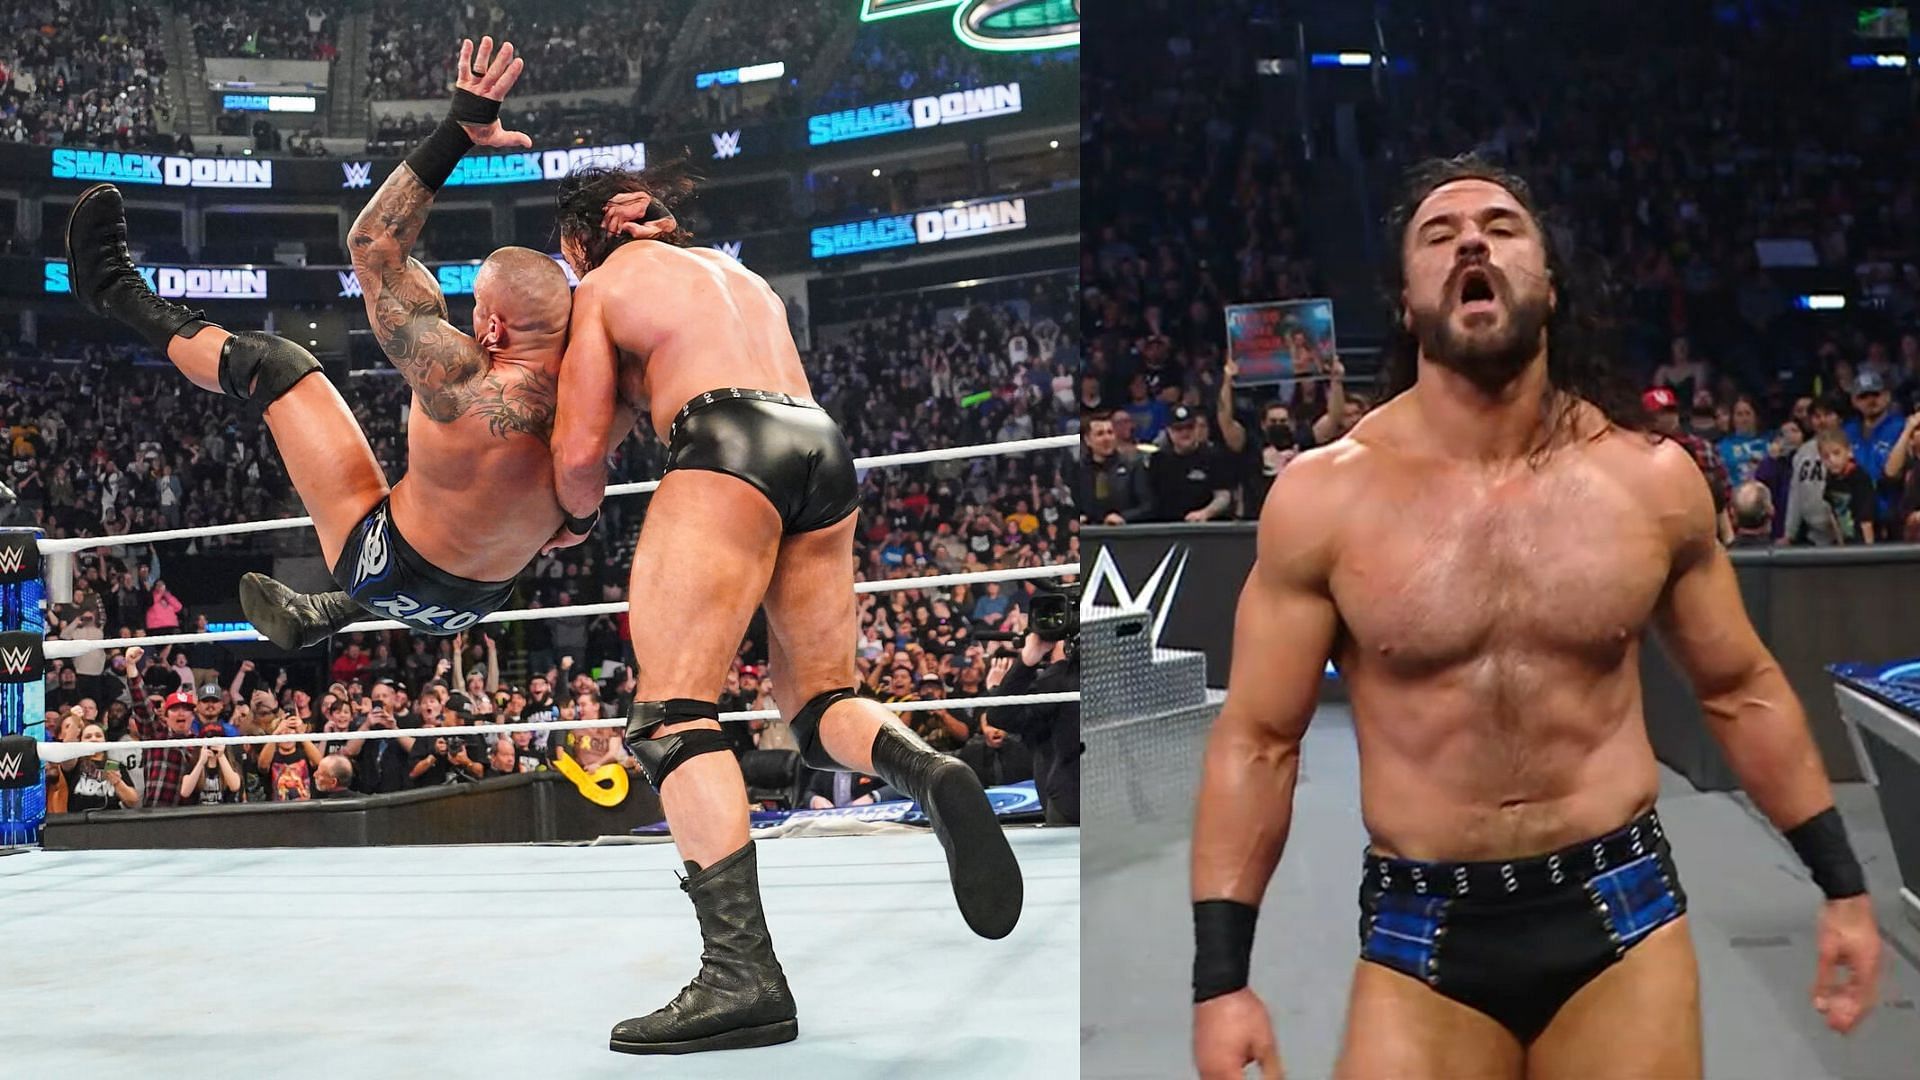 wwe smackdown main event result